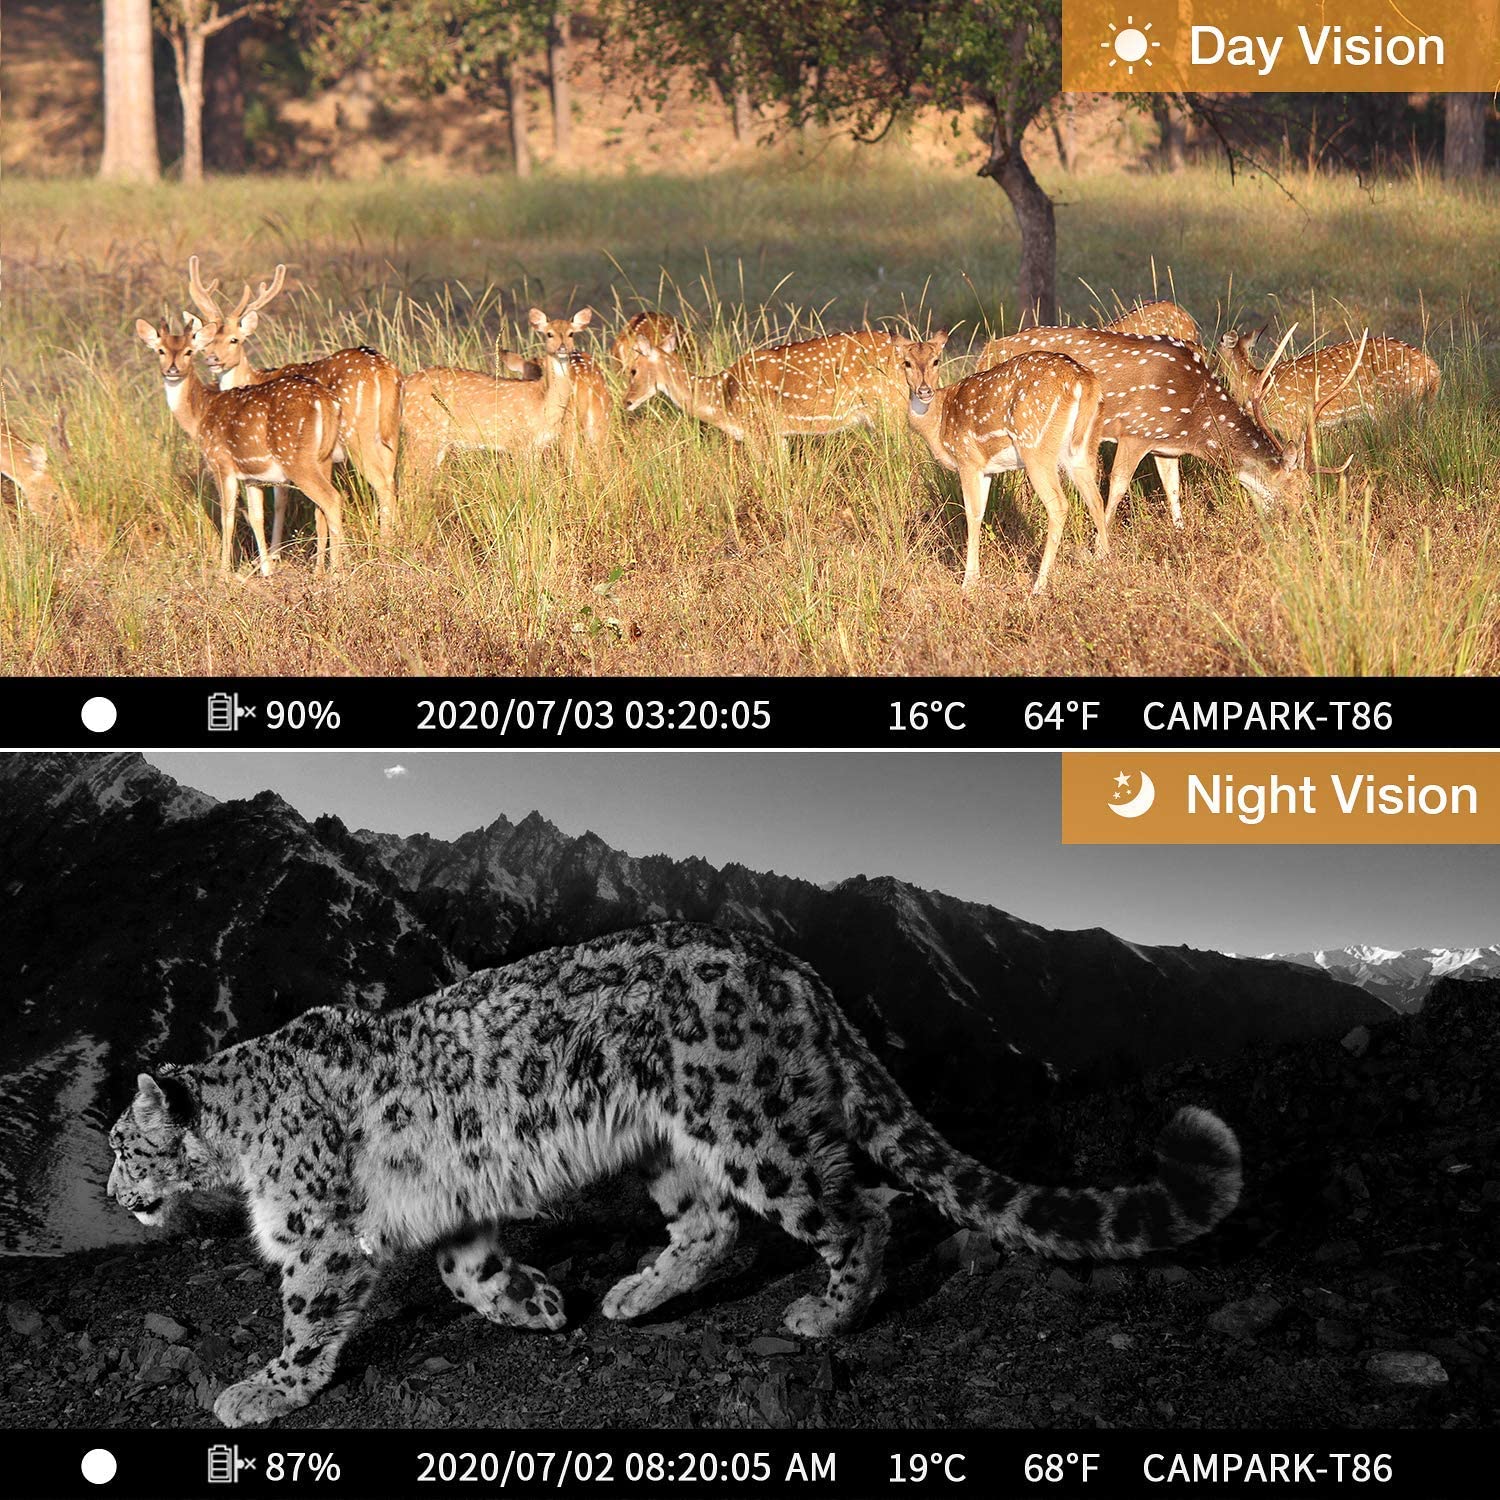 Campark T86 Trail camera's day vision and night vision